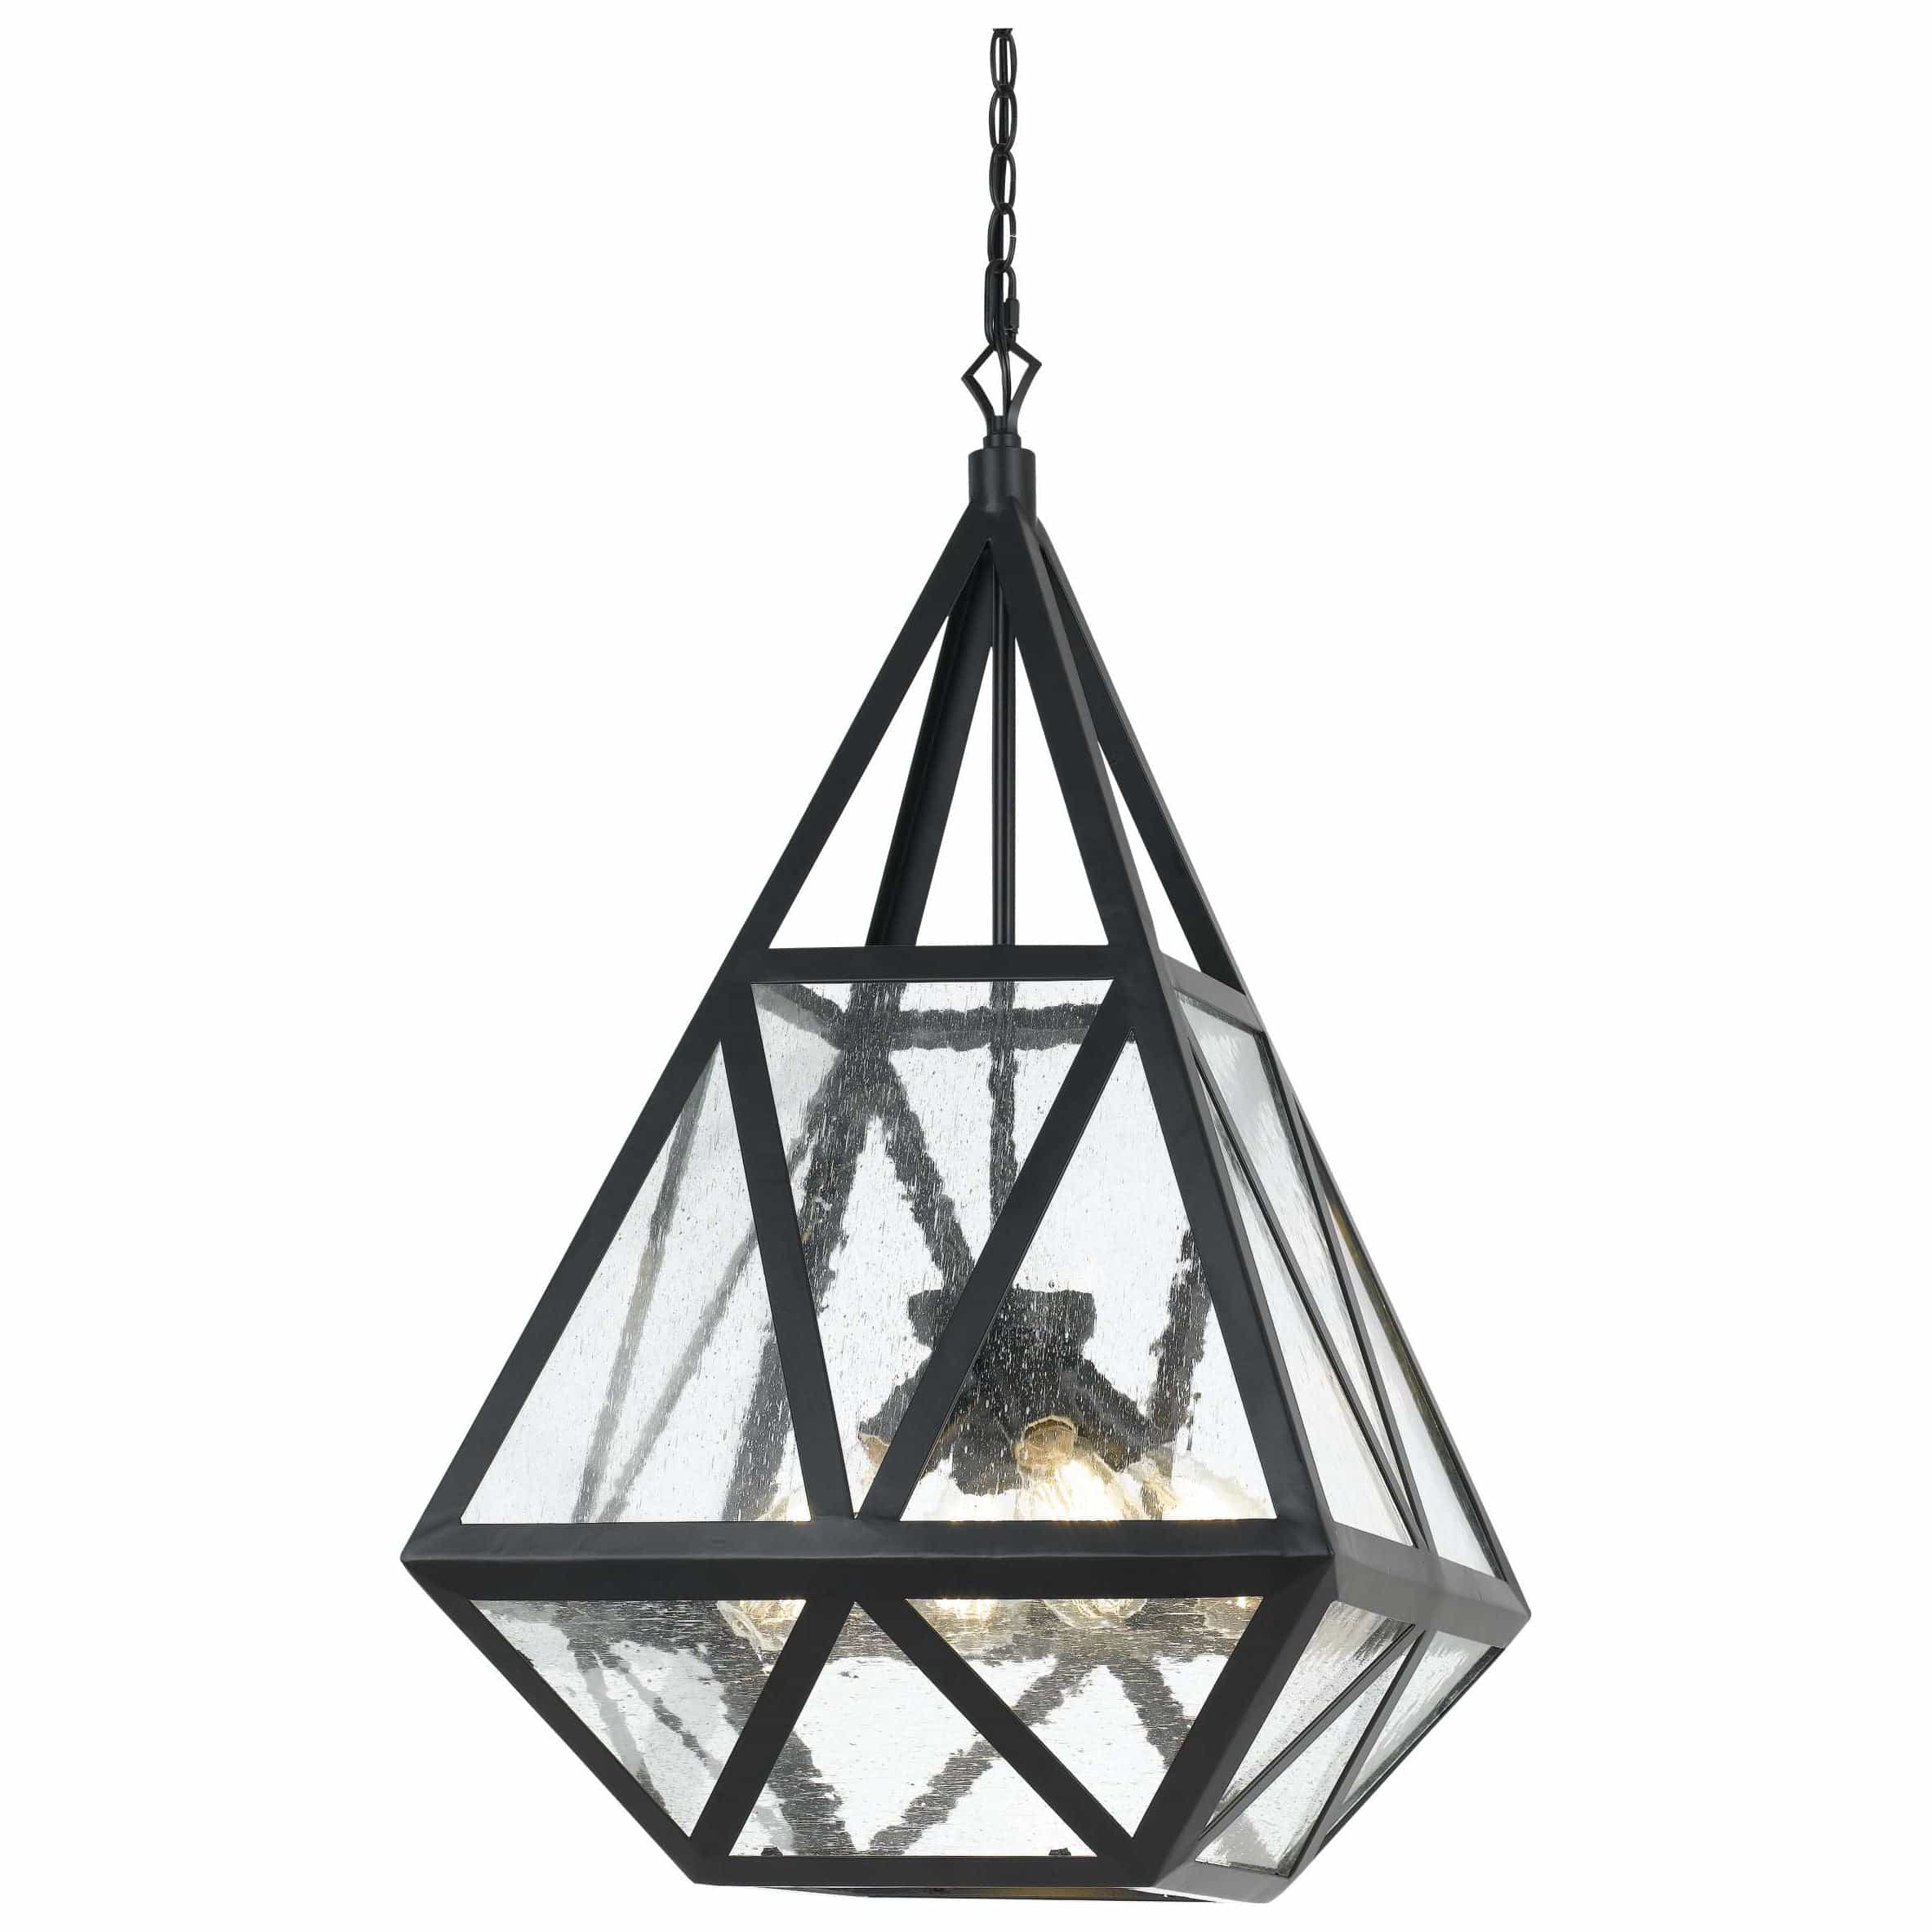 Benzara Geometric Metal Frame Chandelier With Multiple Faceted Side,Black And Clear By Benzara Chandeliers BM225007